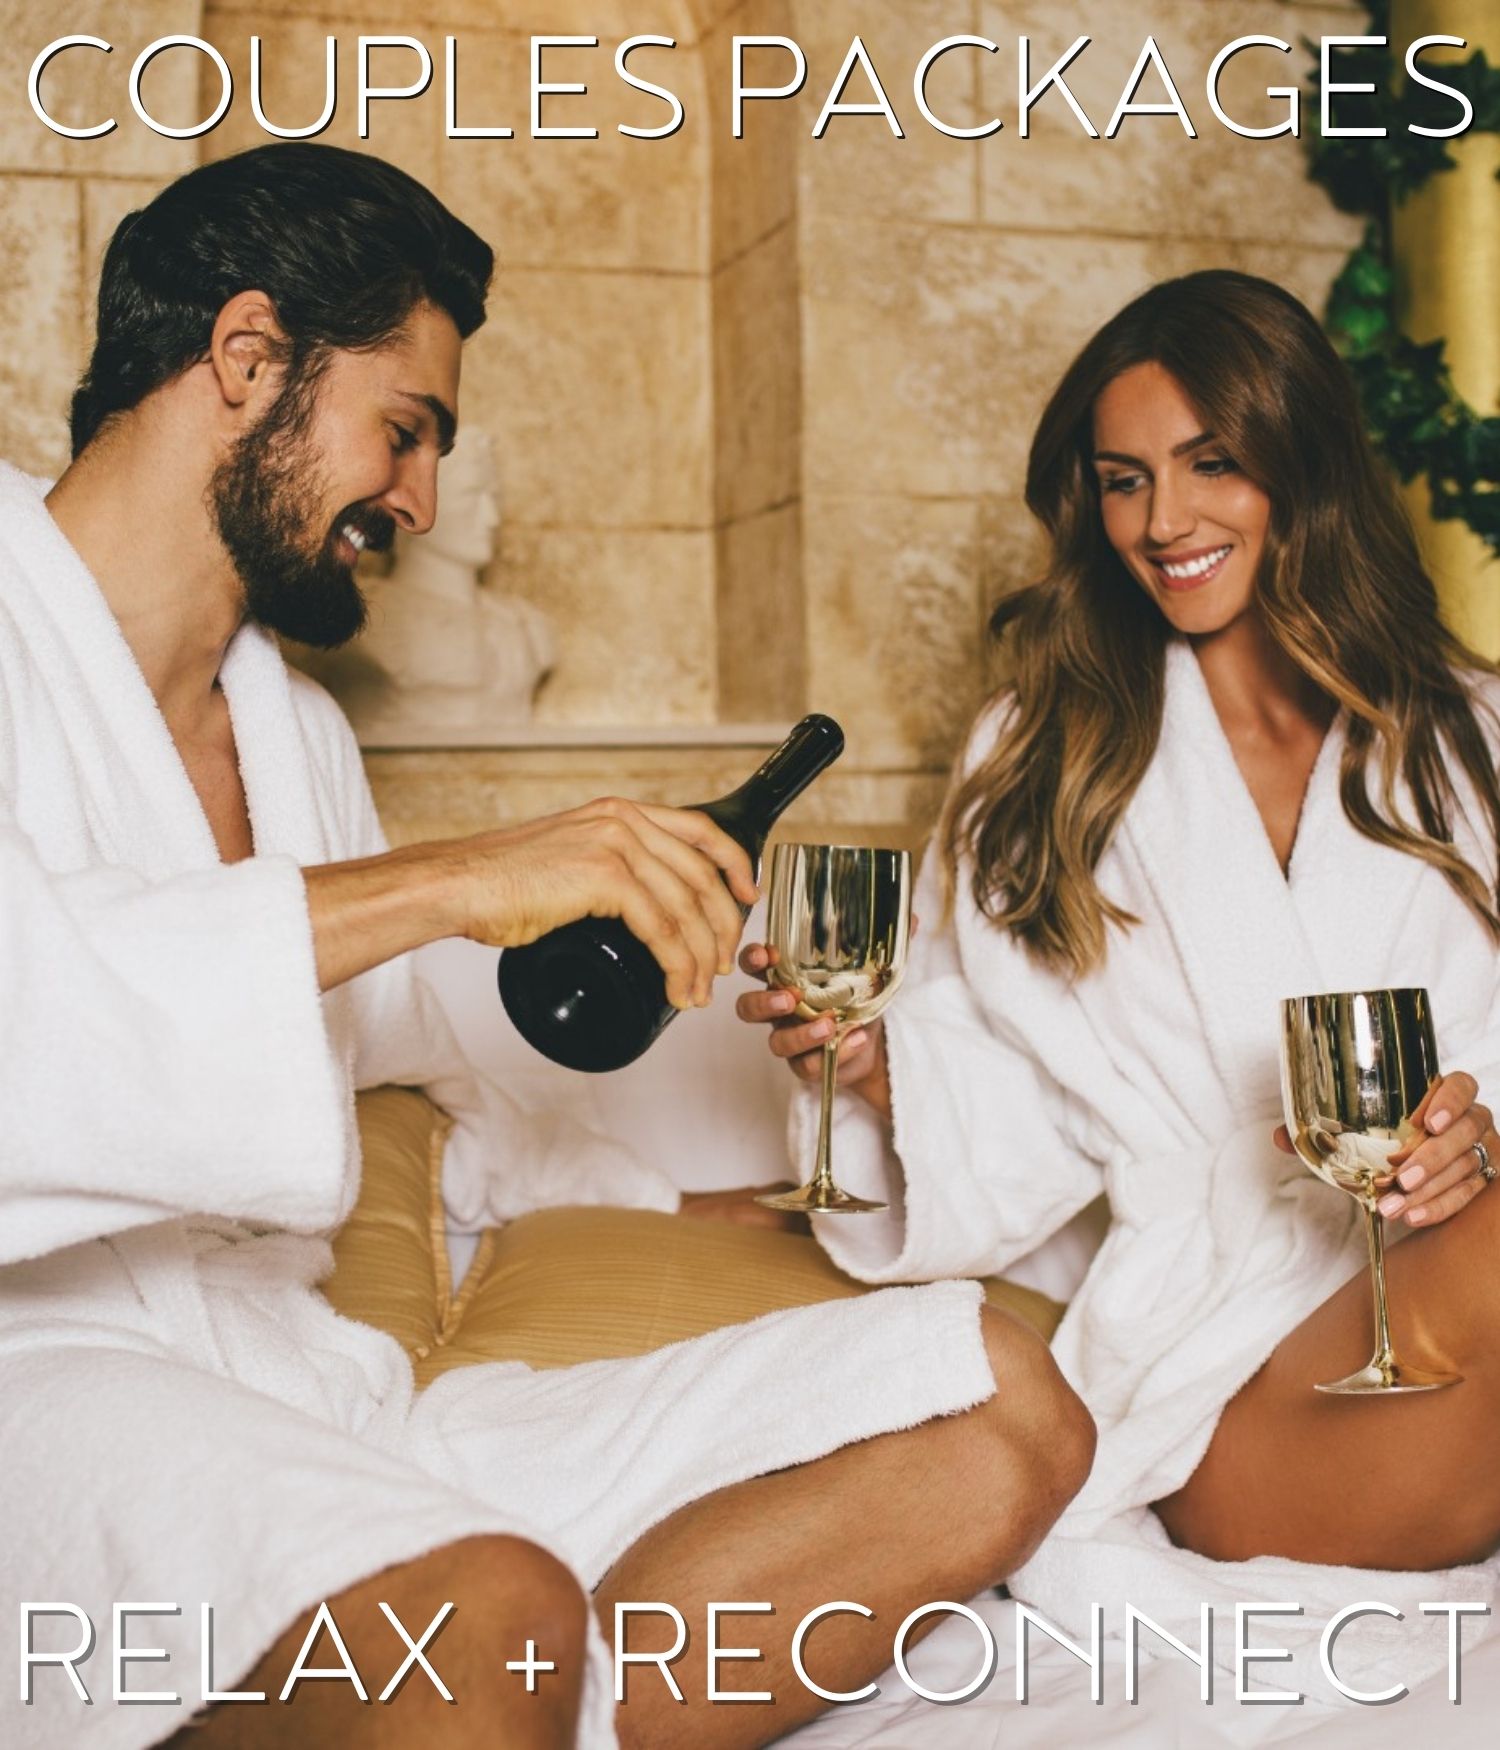 a sweet couple wearing a bathrobe sitting at their bed and having a toast promoting couple packages with relax + reconnect